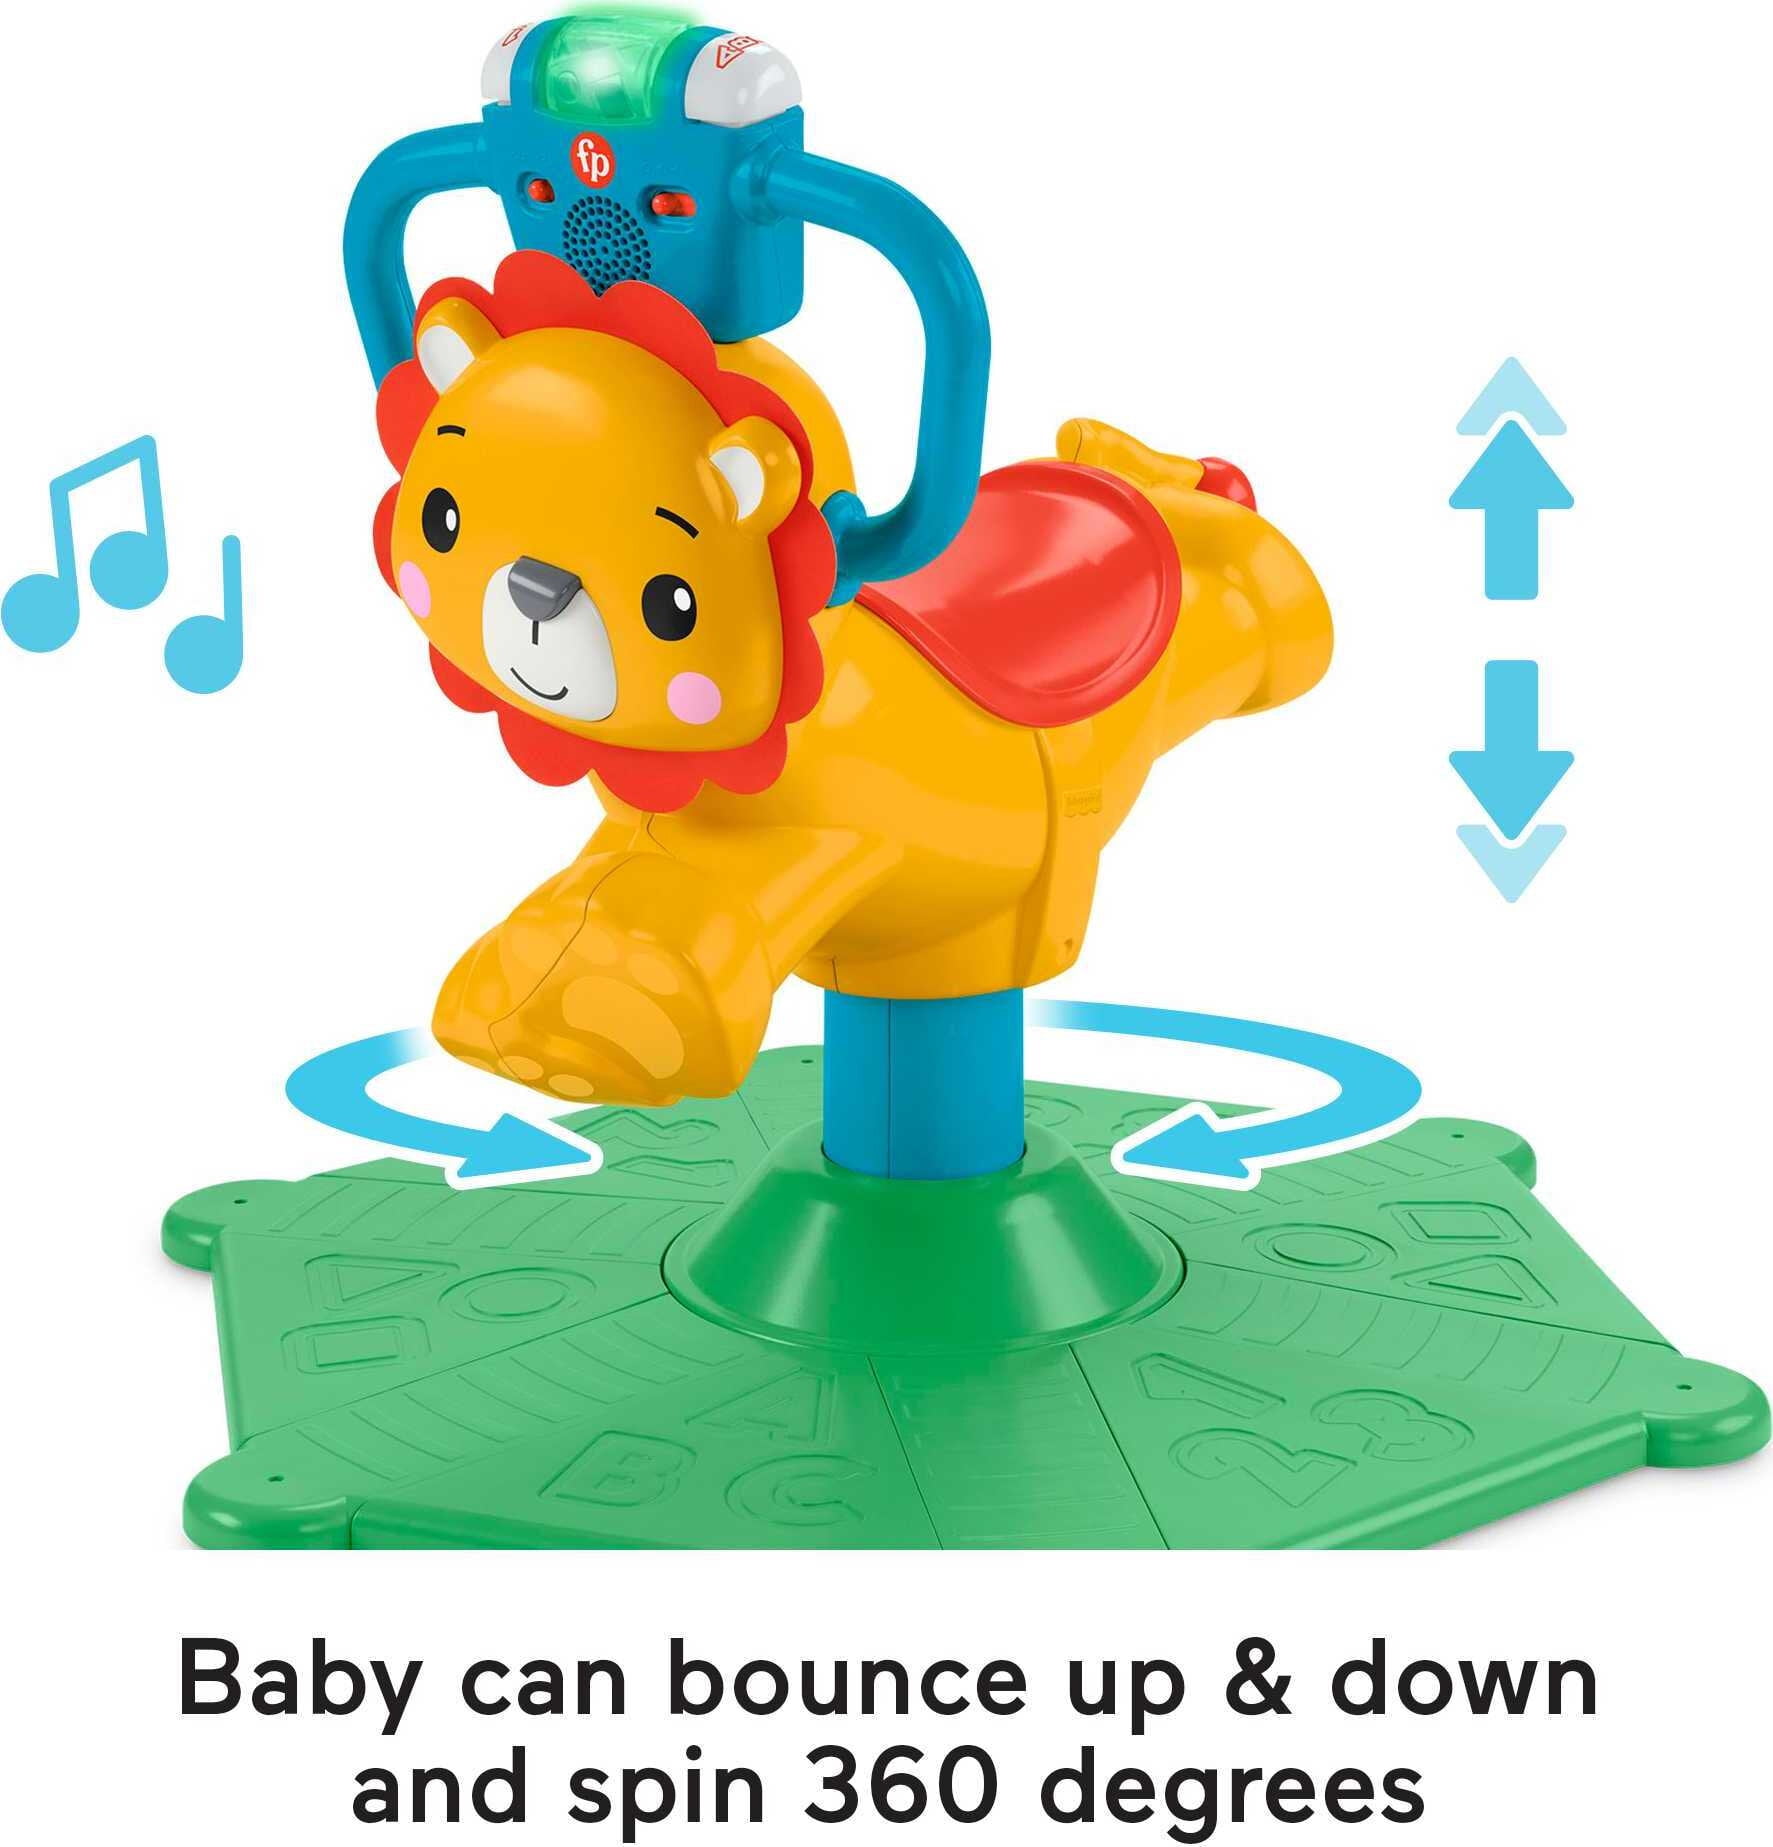 Fisher-Price GHY50 Bounce and Spin Unicorn Mult Stationary Musical Ride-On Toy 